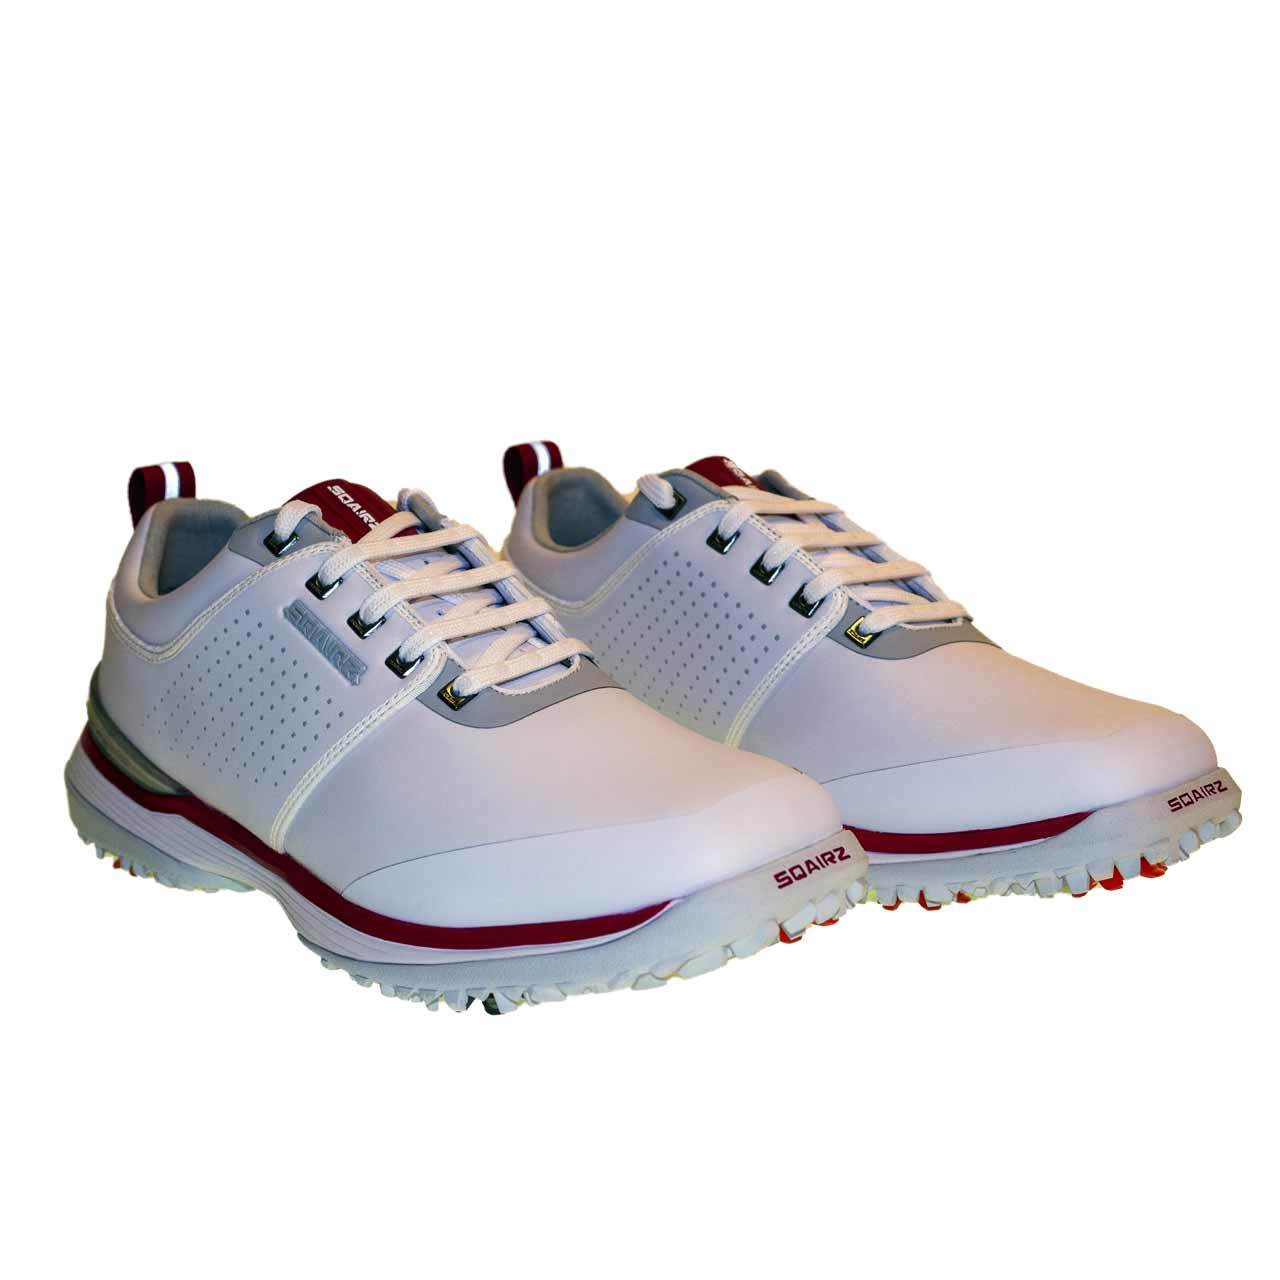 Best golf shoes for 2021: 5 pairs of 